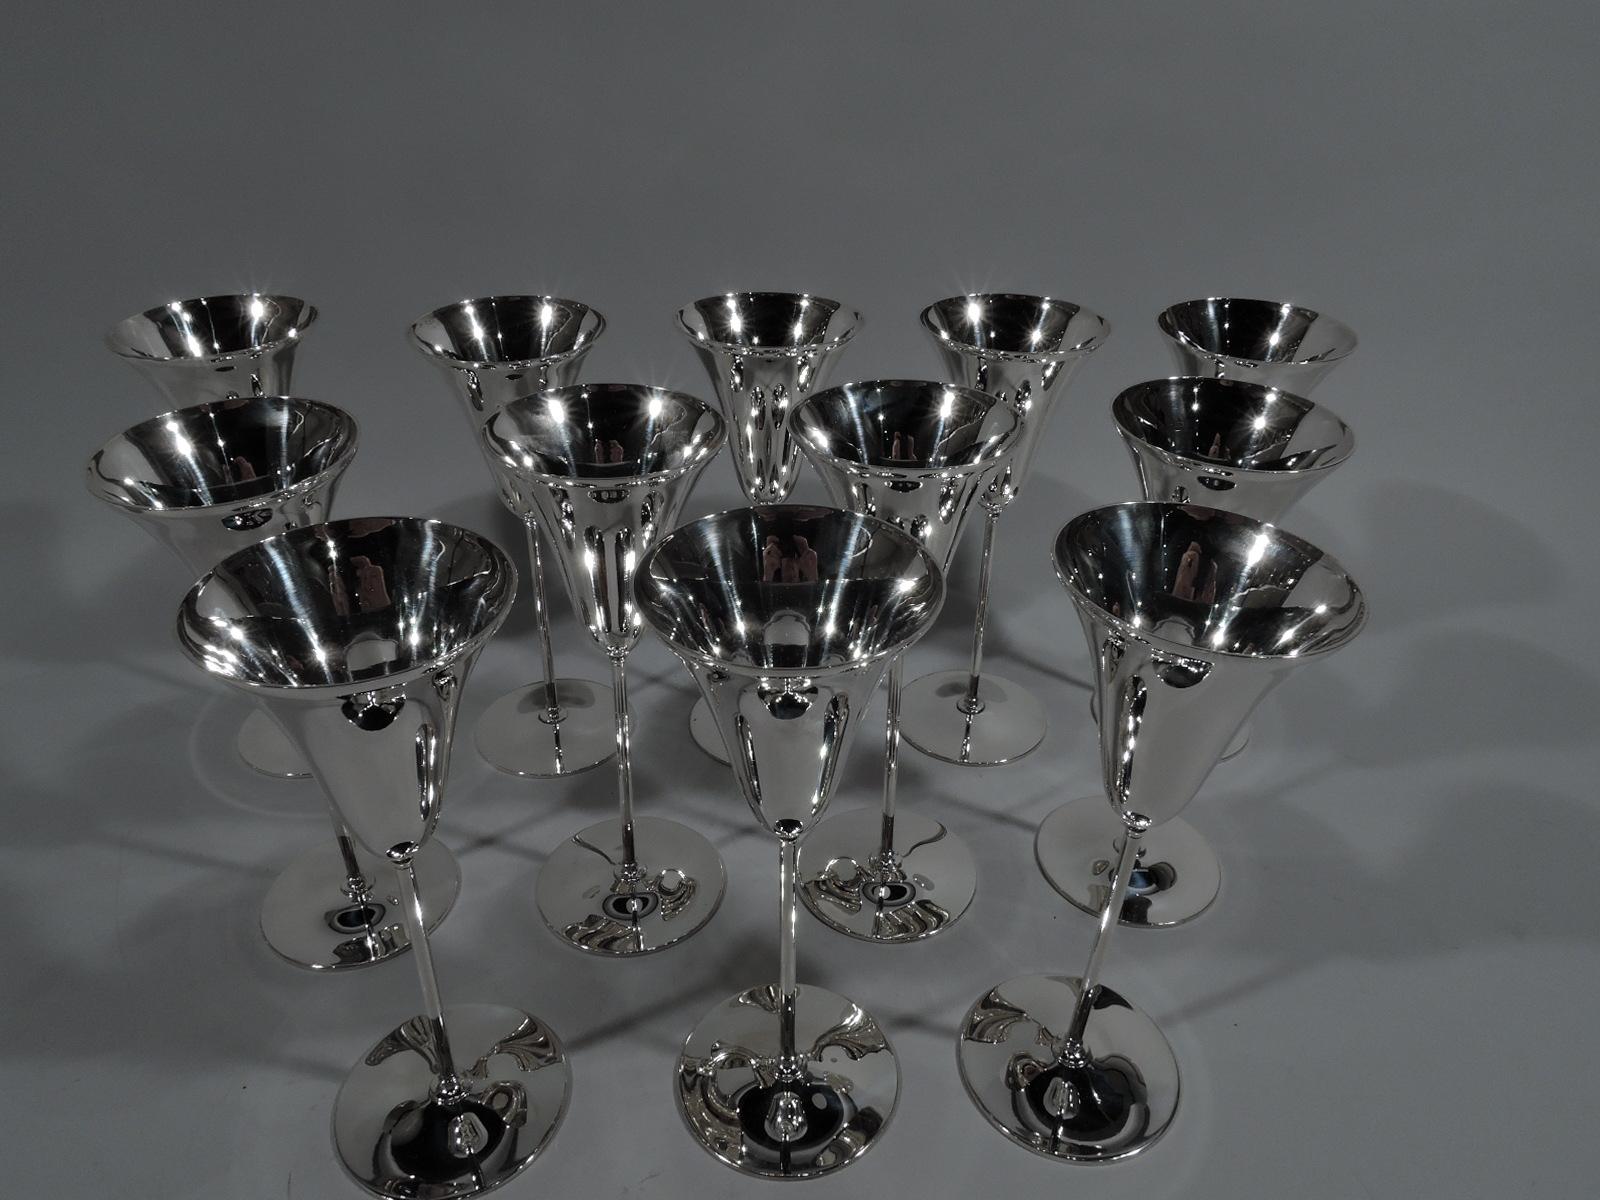 Set of 12 tall and Modern sterling silver flutes. Made by Tiffany & Co. in New York, ca 1924. Each: Conical “tulip” bowl on thin cylindrical shaft mounted to flat circular foot. For chic sipping. Fully marked including pattern no. 20468 (first